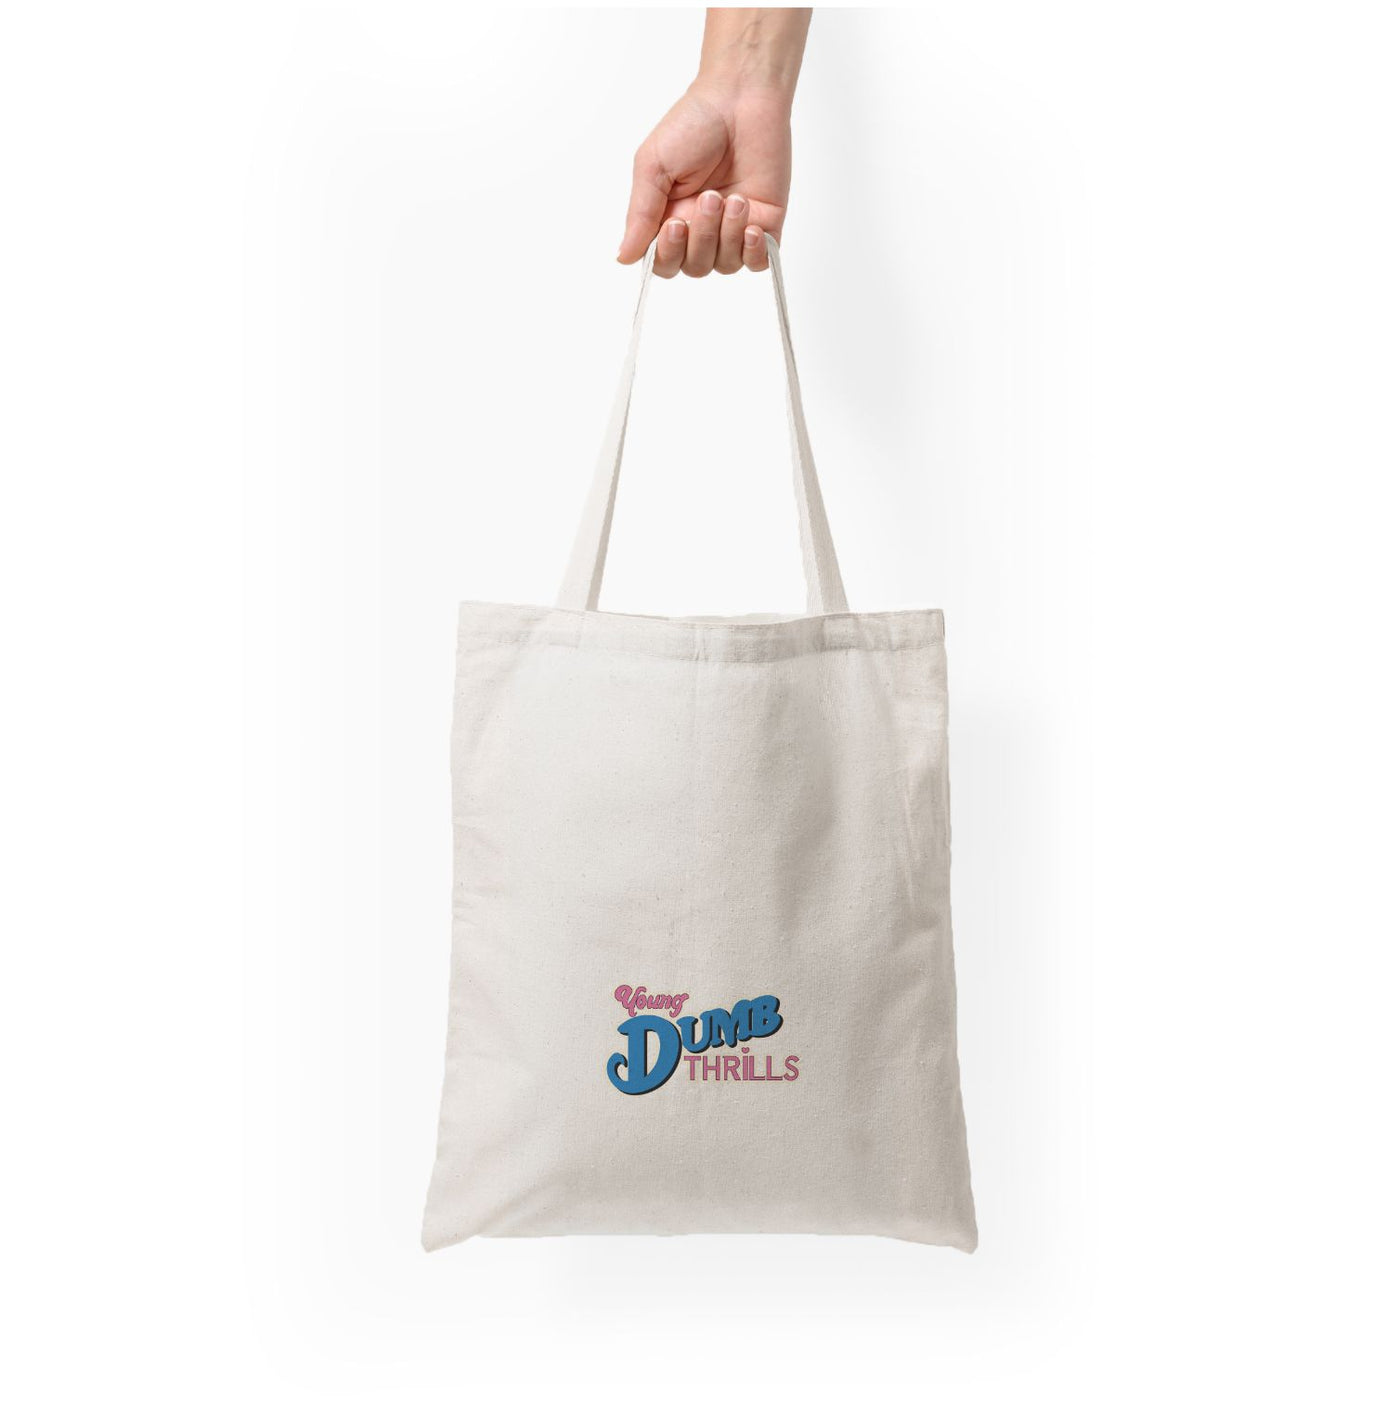 Young Dumb Thrills - Obviously - McFly Tote Bag